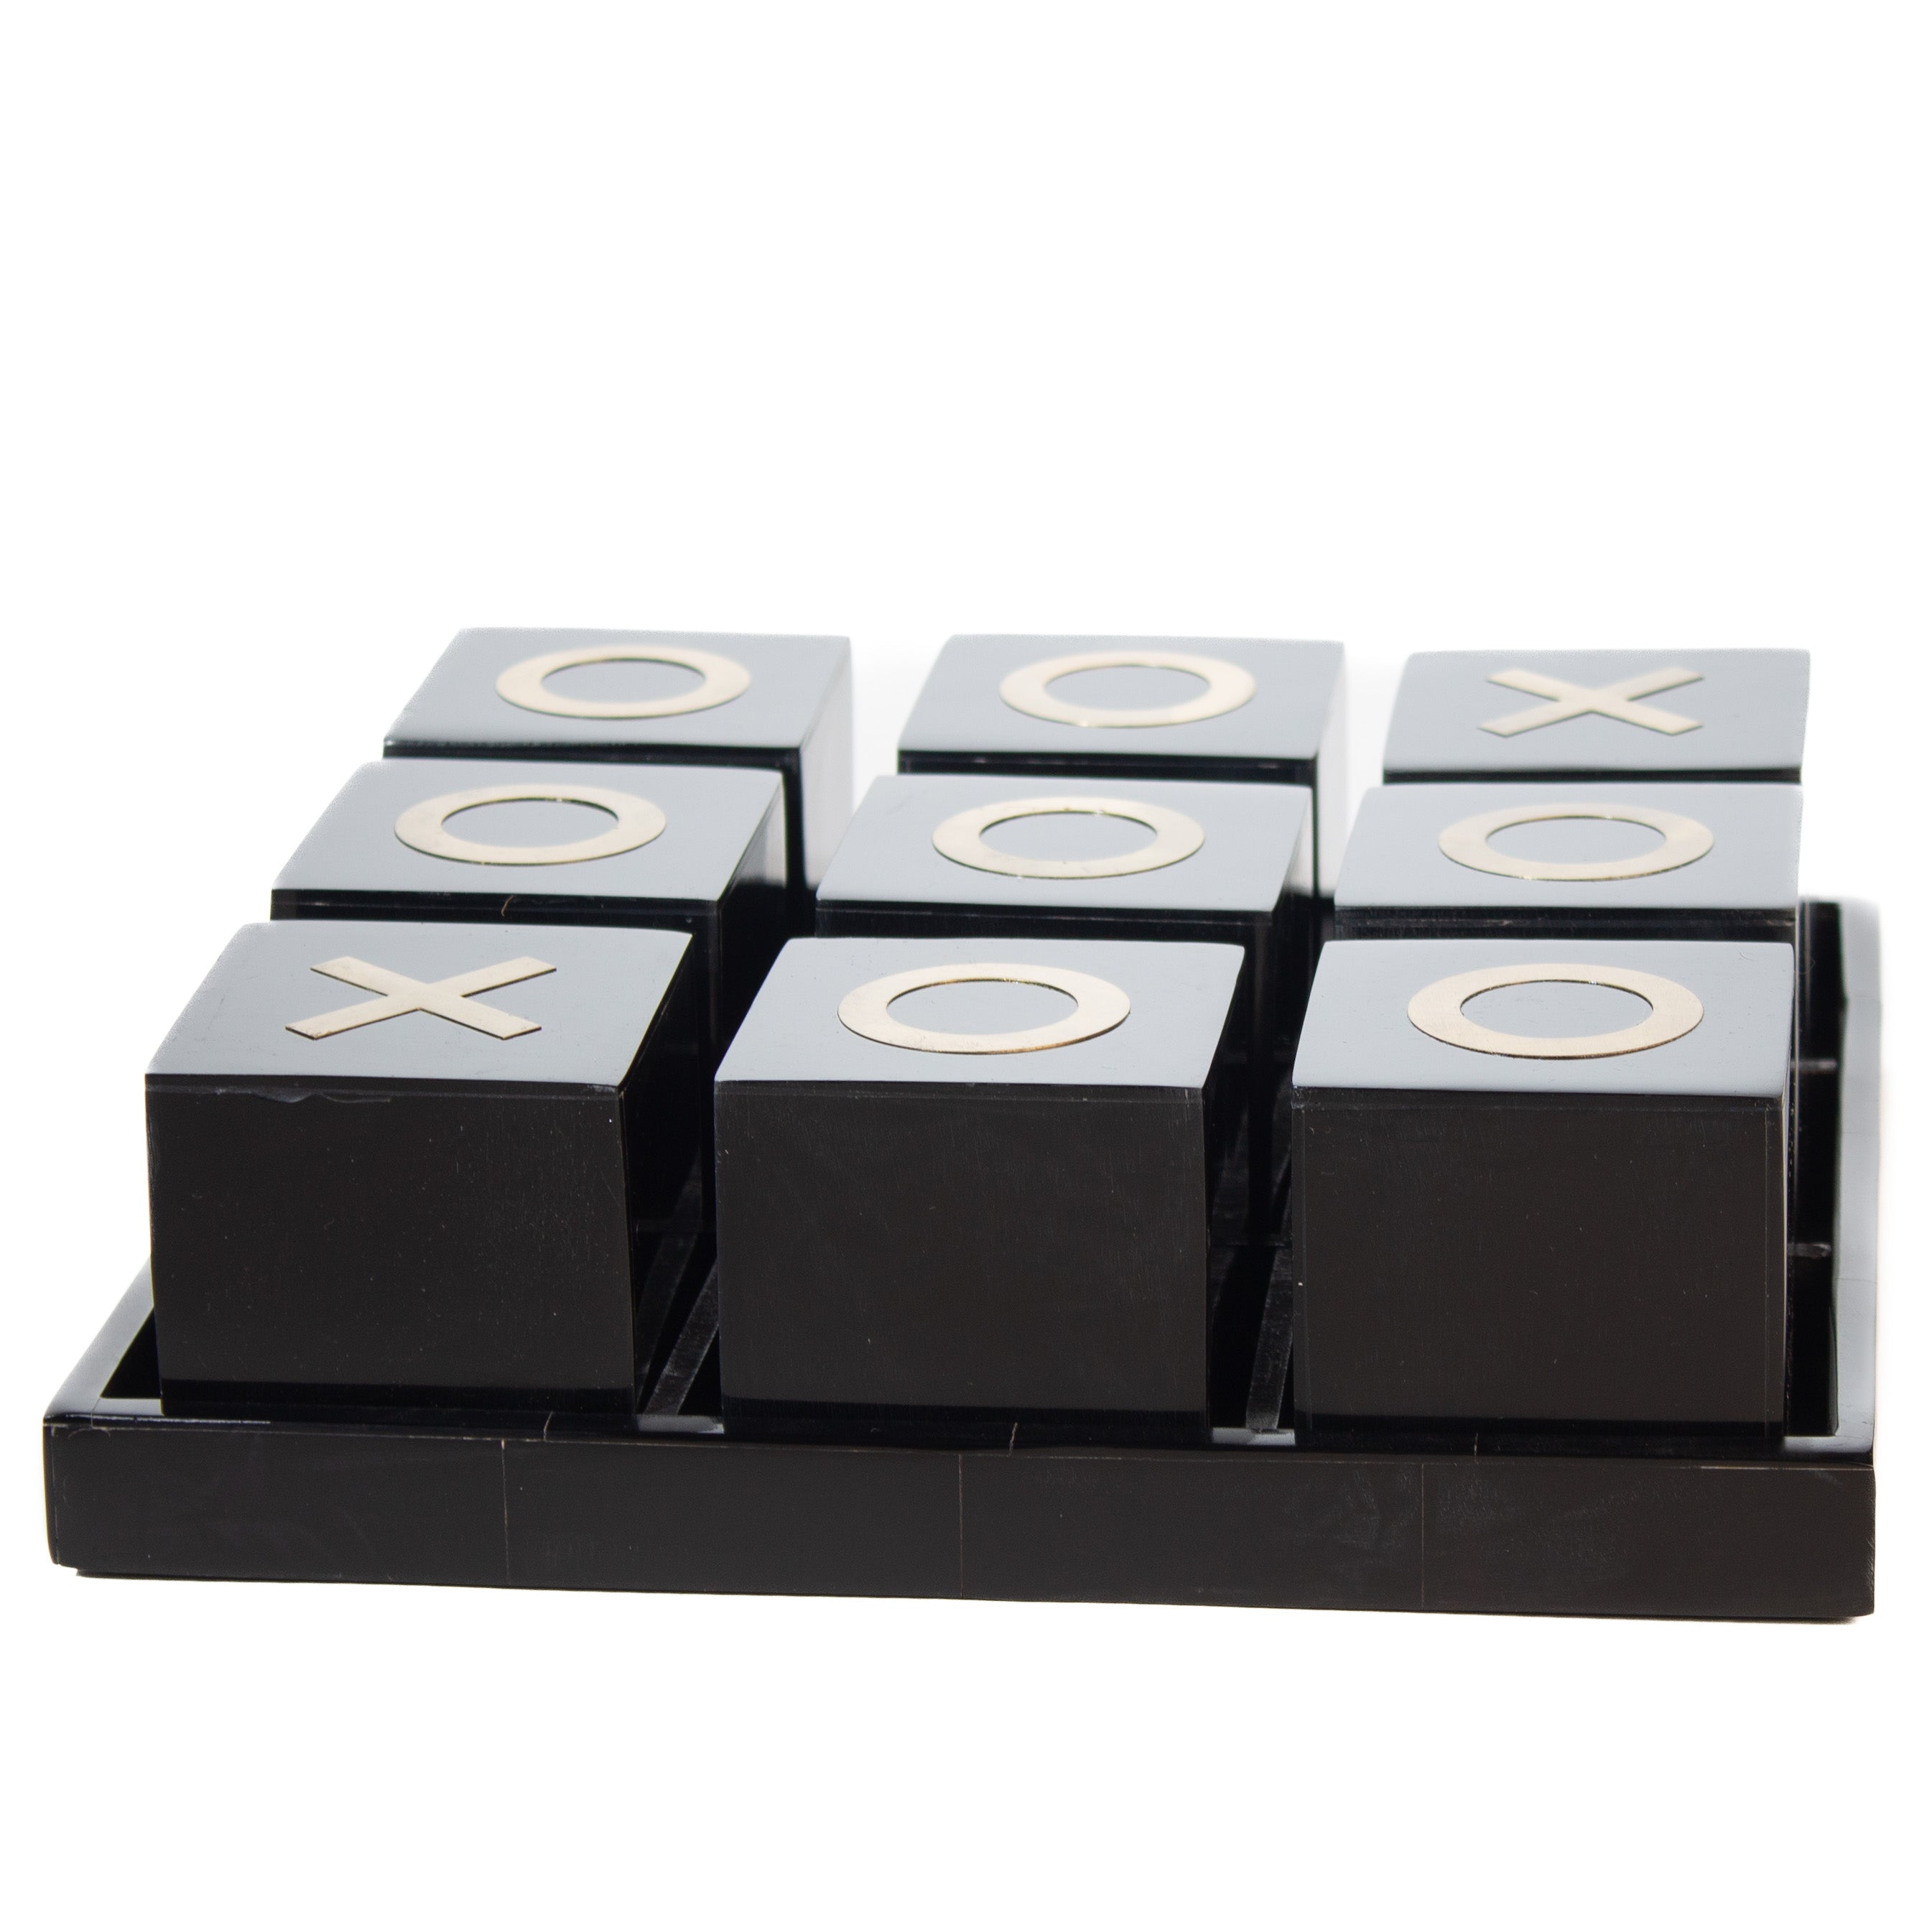 Decorative game. Black and Brass Tic Tac Toe.  Smooth black cubes with brass X's and O's contained in a black tray serving as the game board.